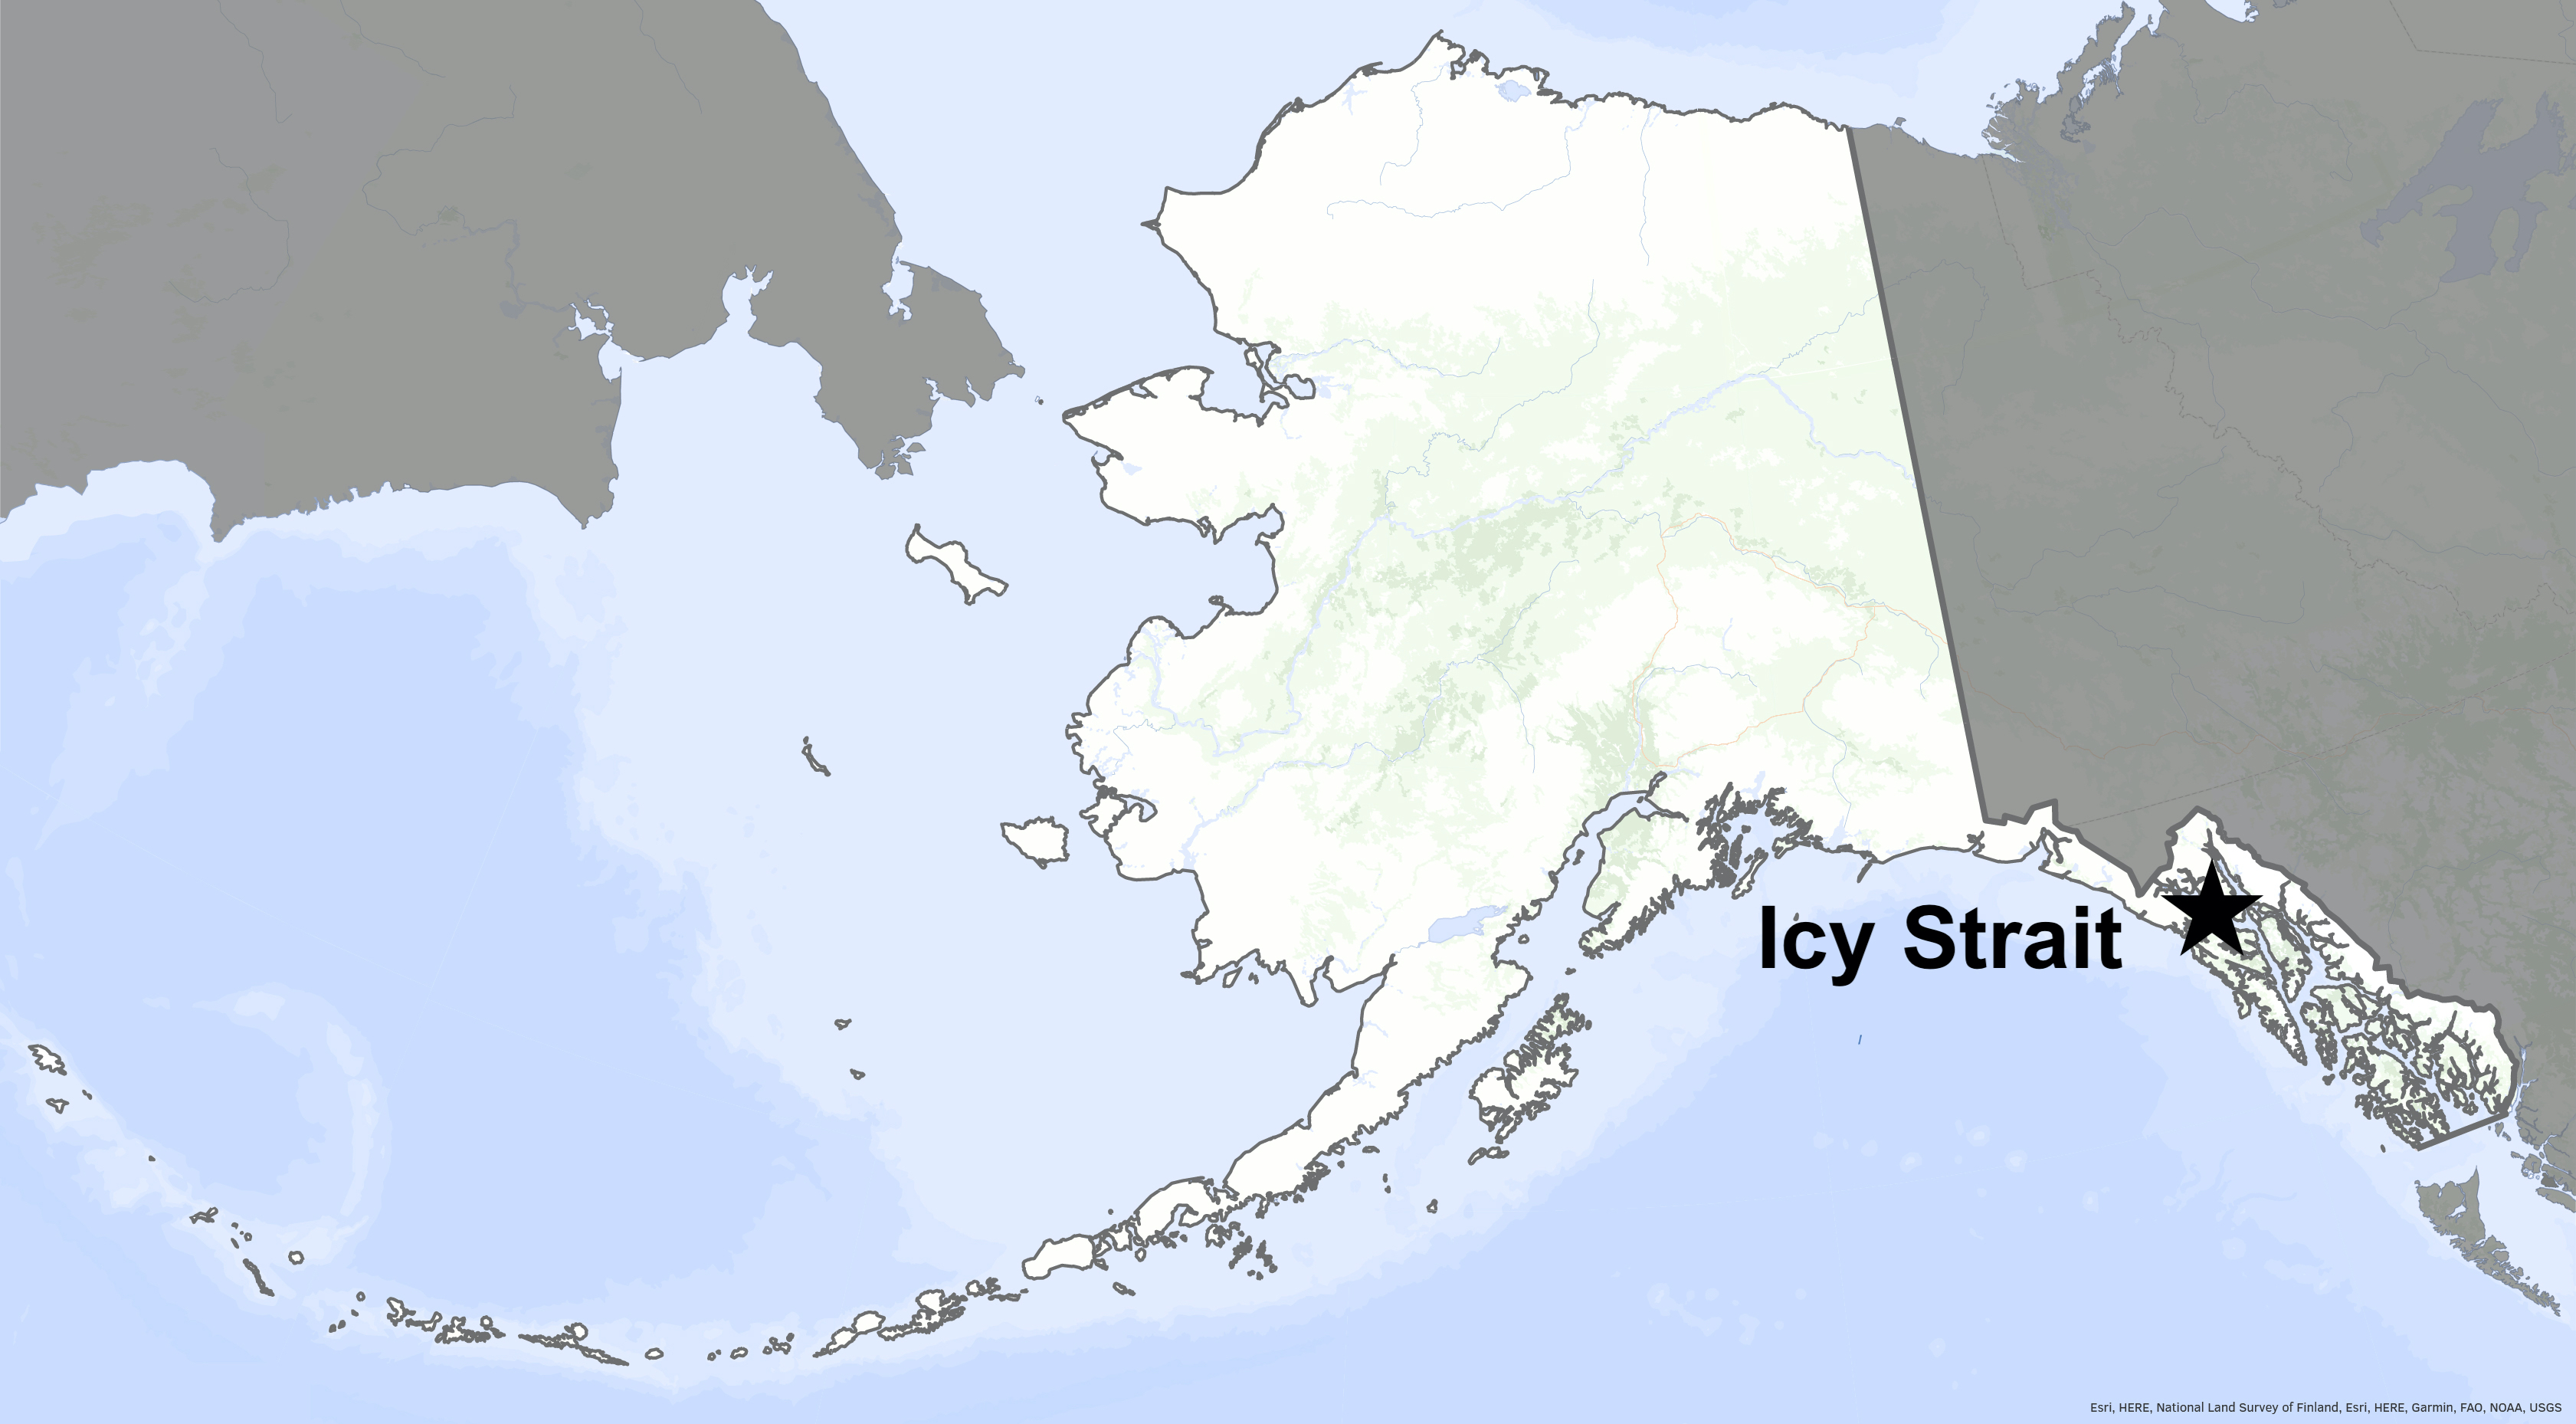 A star on a map of Alaska marks the location of Icy Strait in Southeast Alaska.